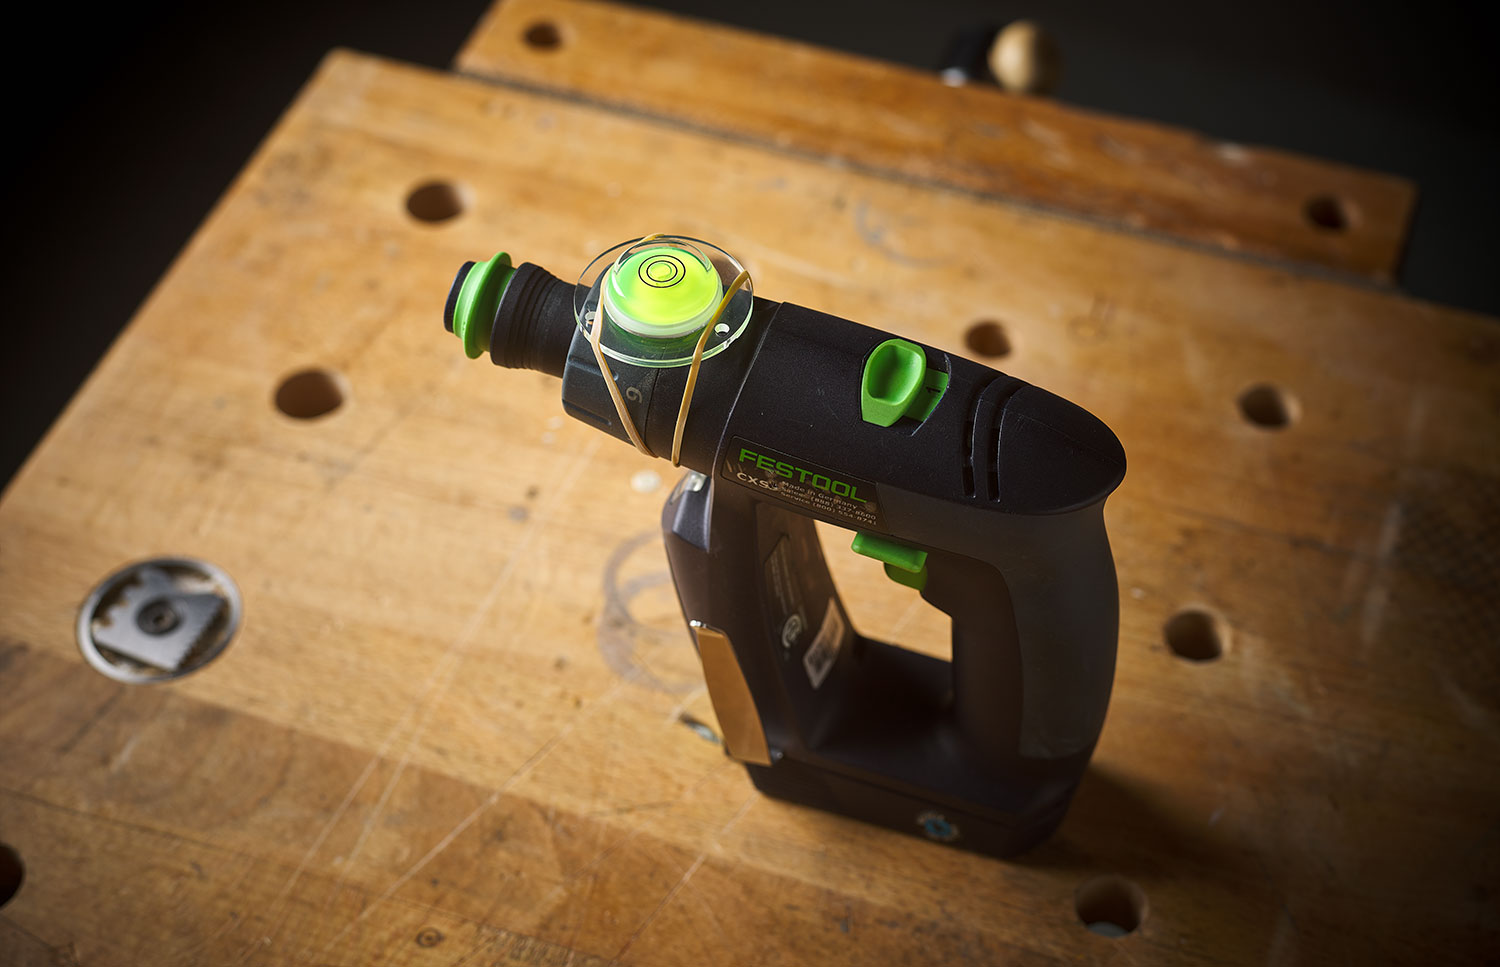 Bullseye level attached to a Festool drill to indicate level